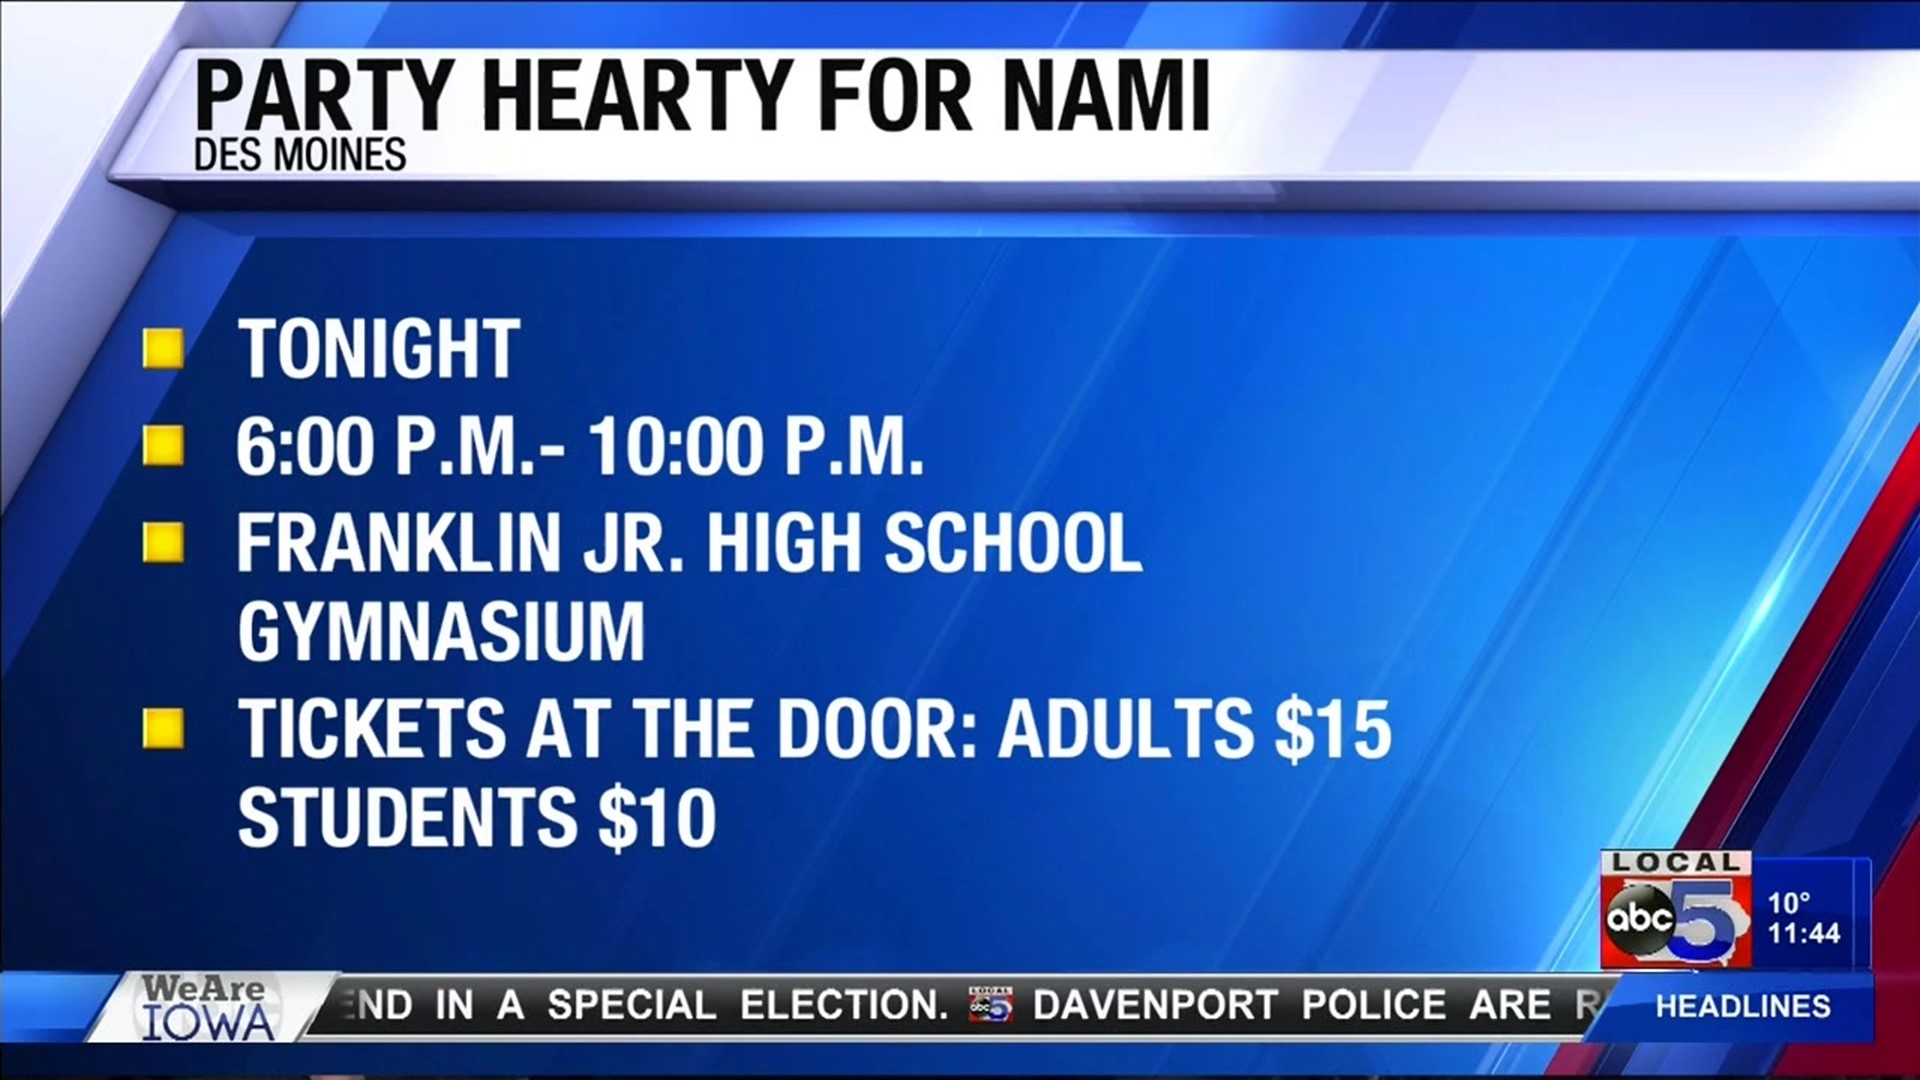 Party Hearty for NAMI tonight at 6:00 p.m.